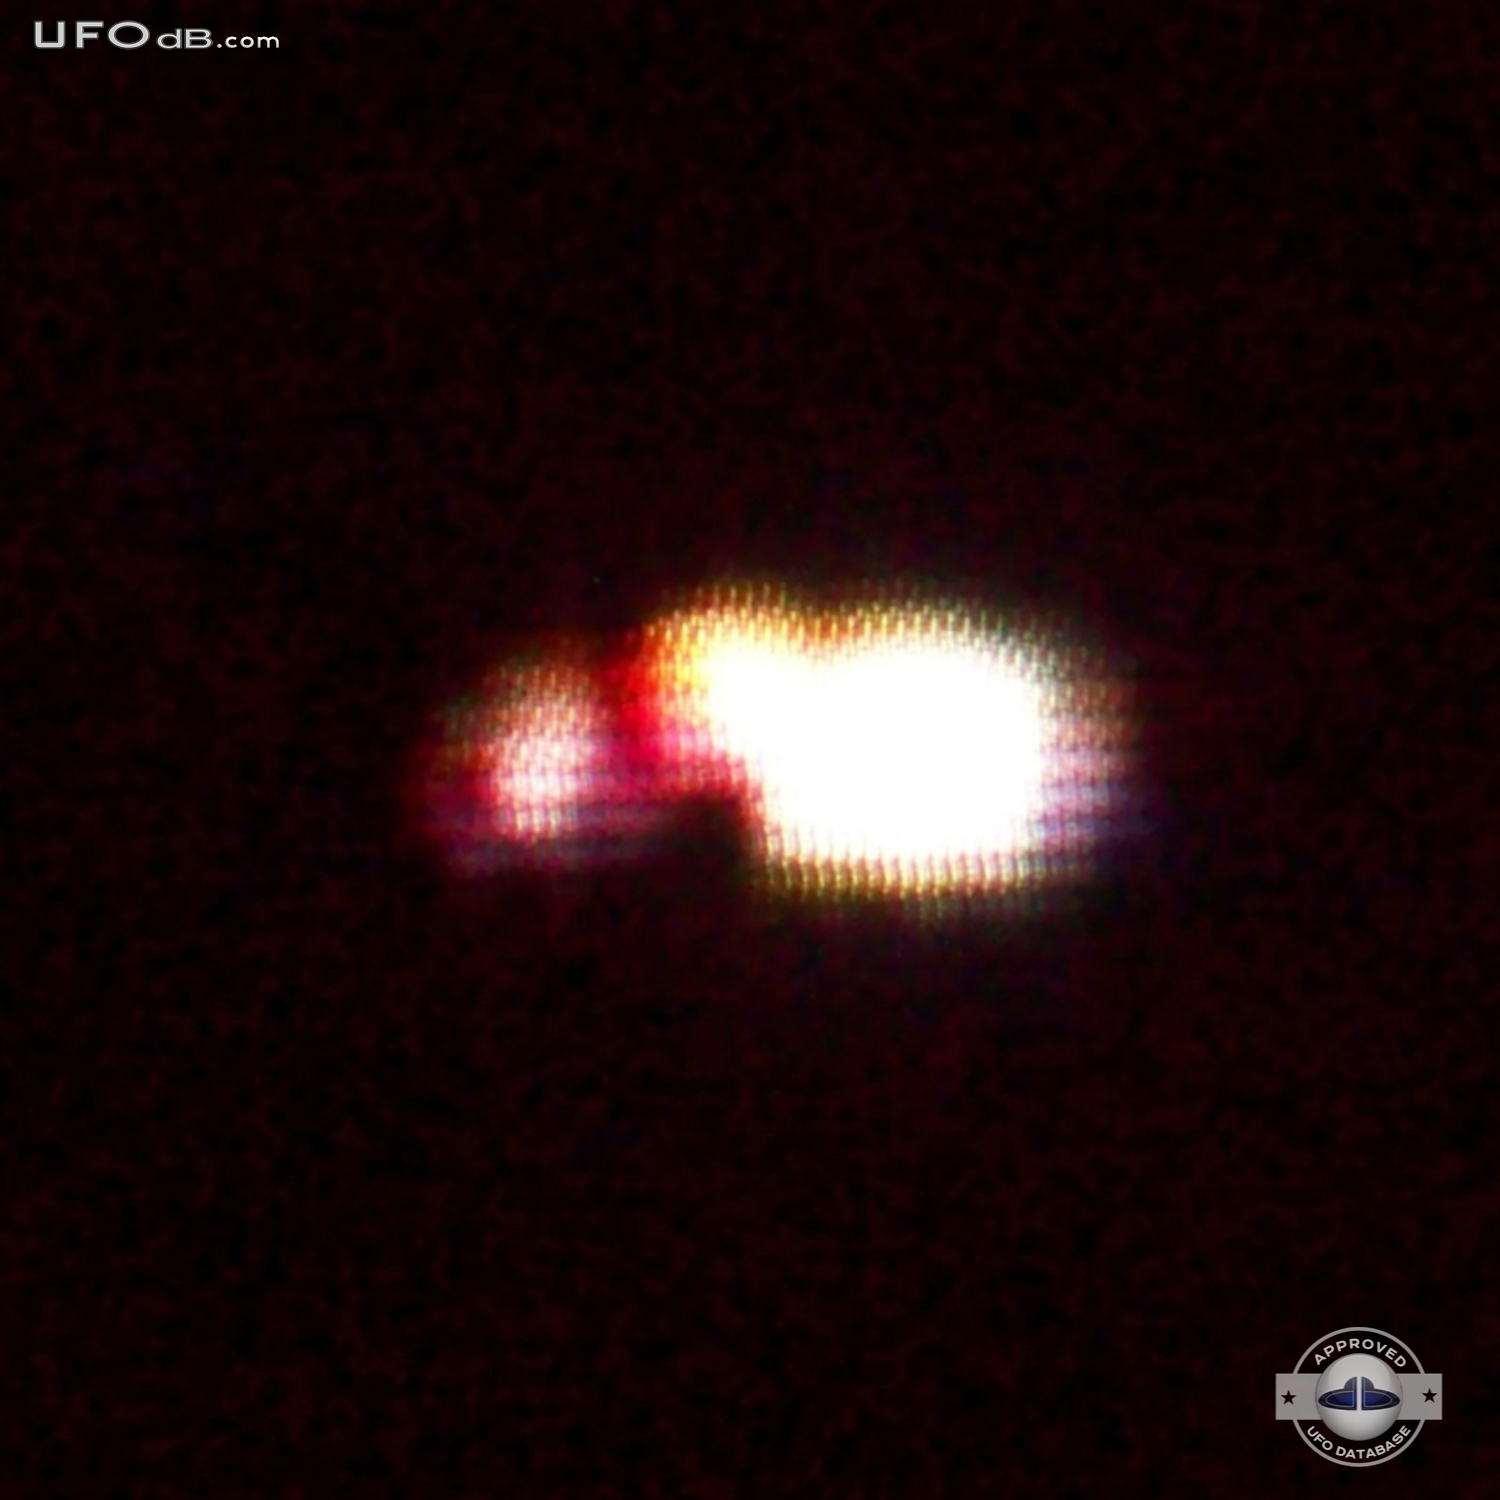 Silently out of nowhere | UFO passing overhead in Kentucky, USA | 2011 UFO Picture #364-2